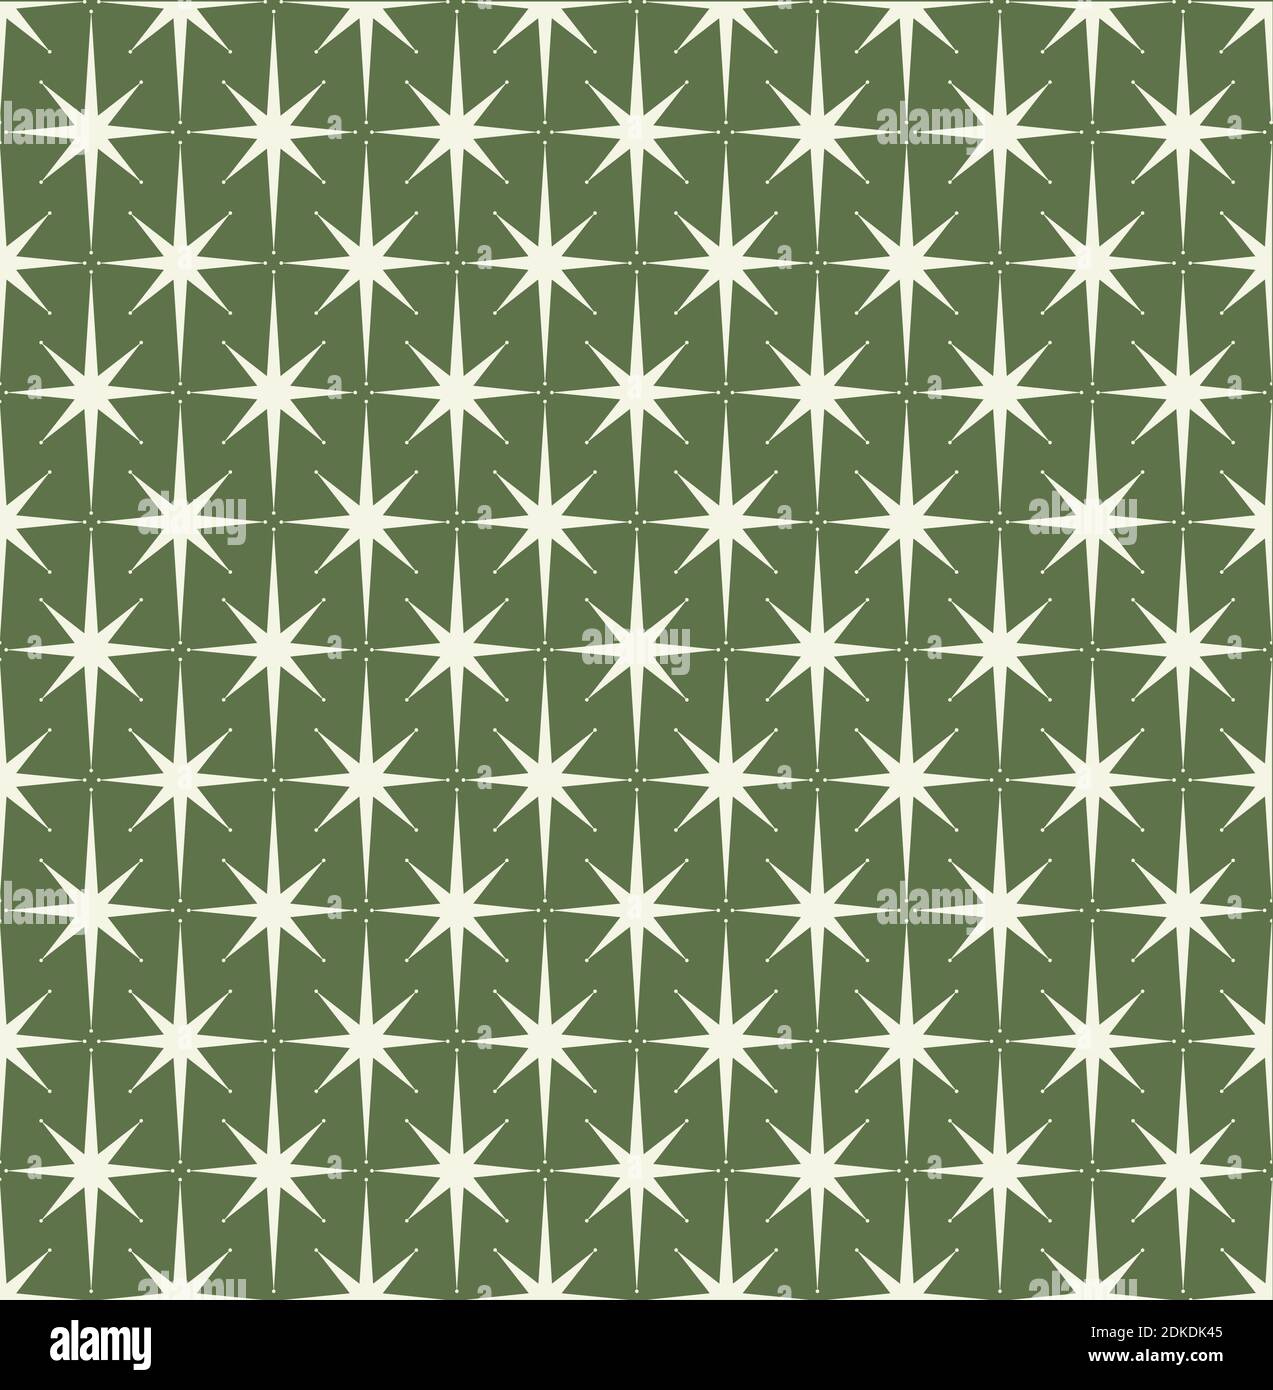 Mid-century modern wrapping paper starburst pattern on olive green background..  Inspired by Atomic era. Repeatable and seamless. Stock Vector